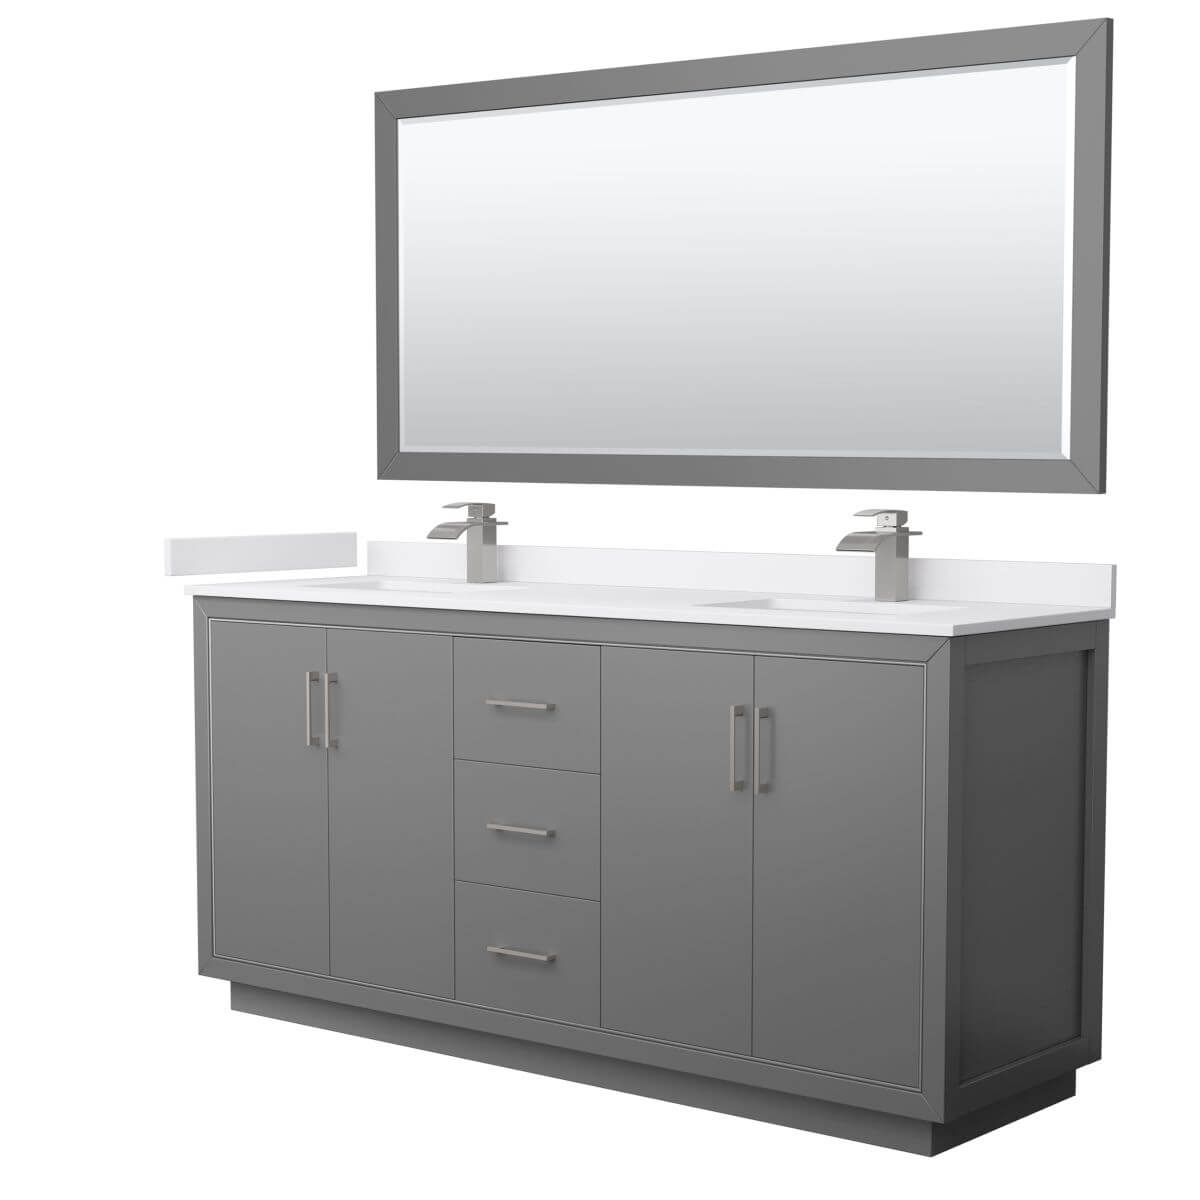 Wyndham Collection WCF111172DKGWCUNSM70 Icon 72 inch Double Bathroom Vanity in Dark Gray with White Cultured Marble Countertop, Undermount Square Sinks, Brushed Nickel Trim and 70 Inch Mirror